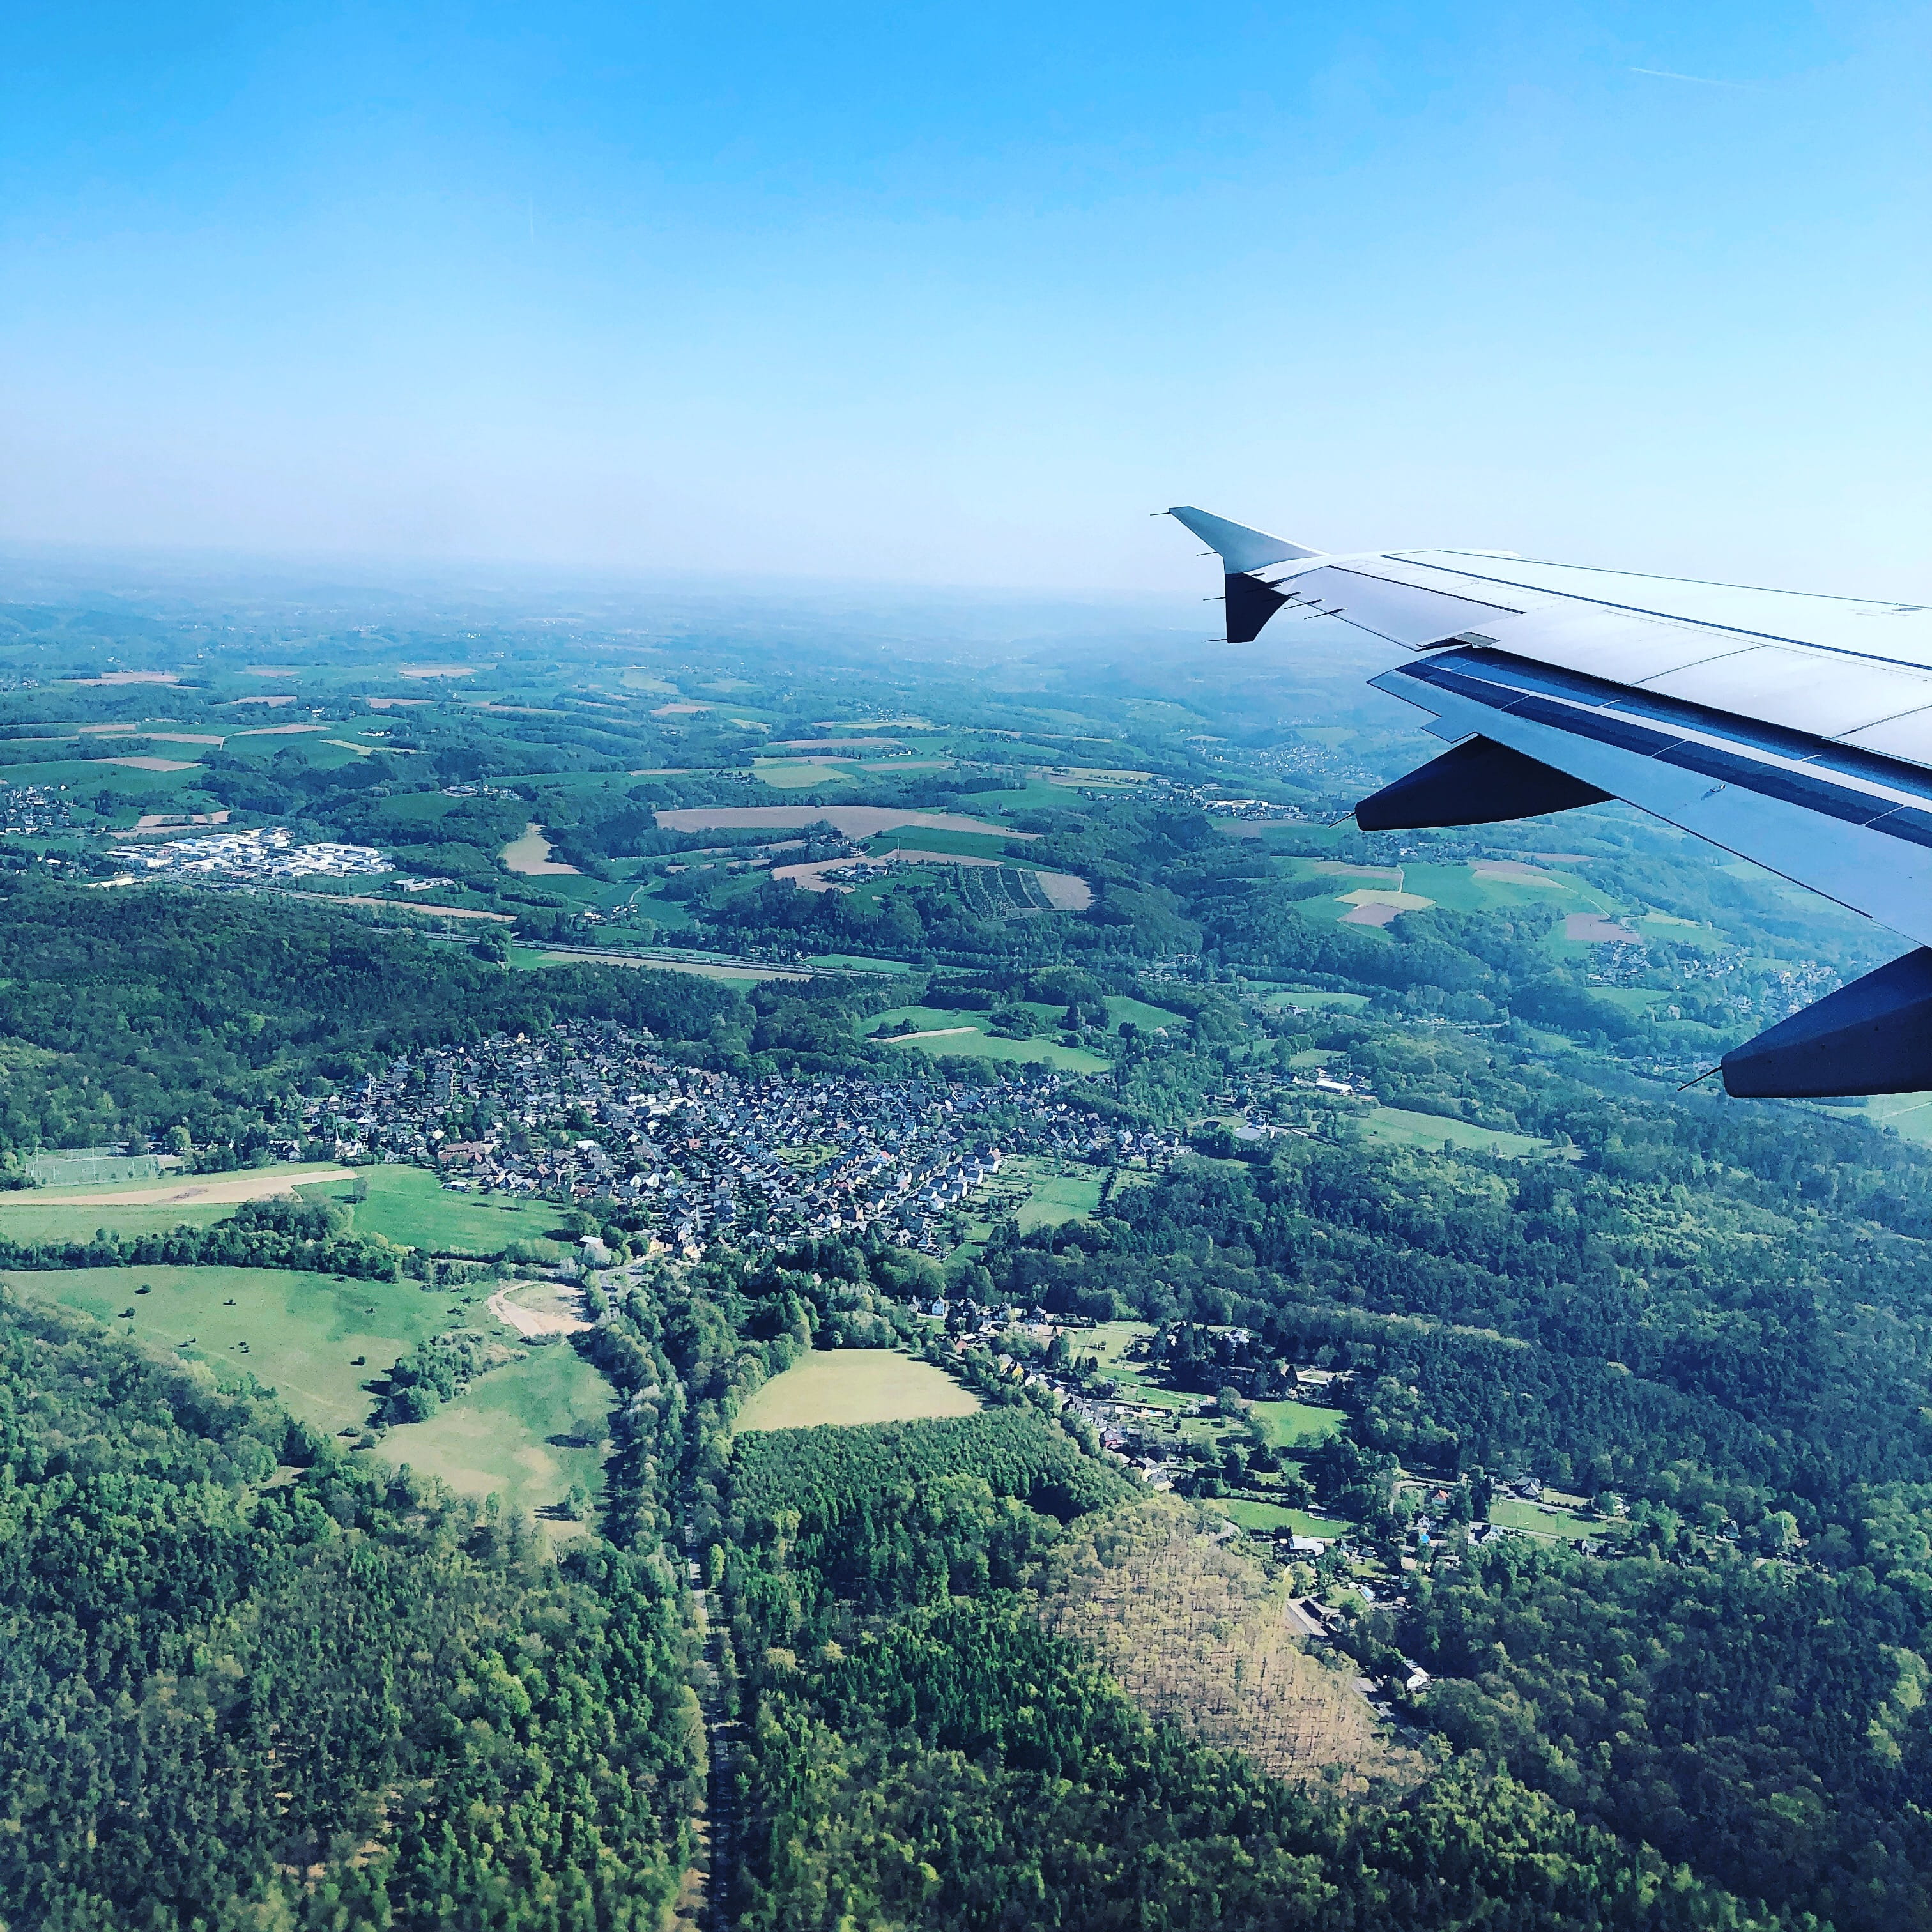 landscape, outdoors, nature, scenery, airplane, aerial view